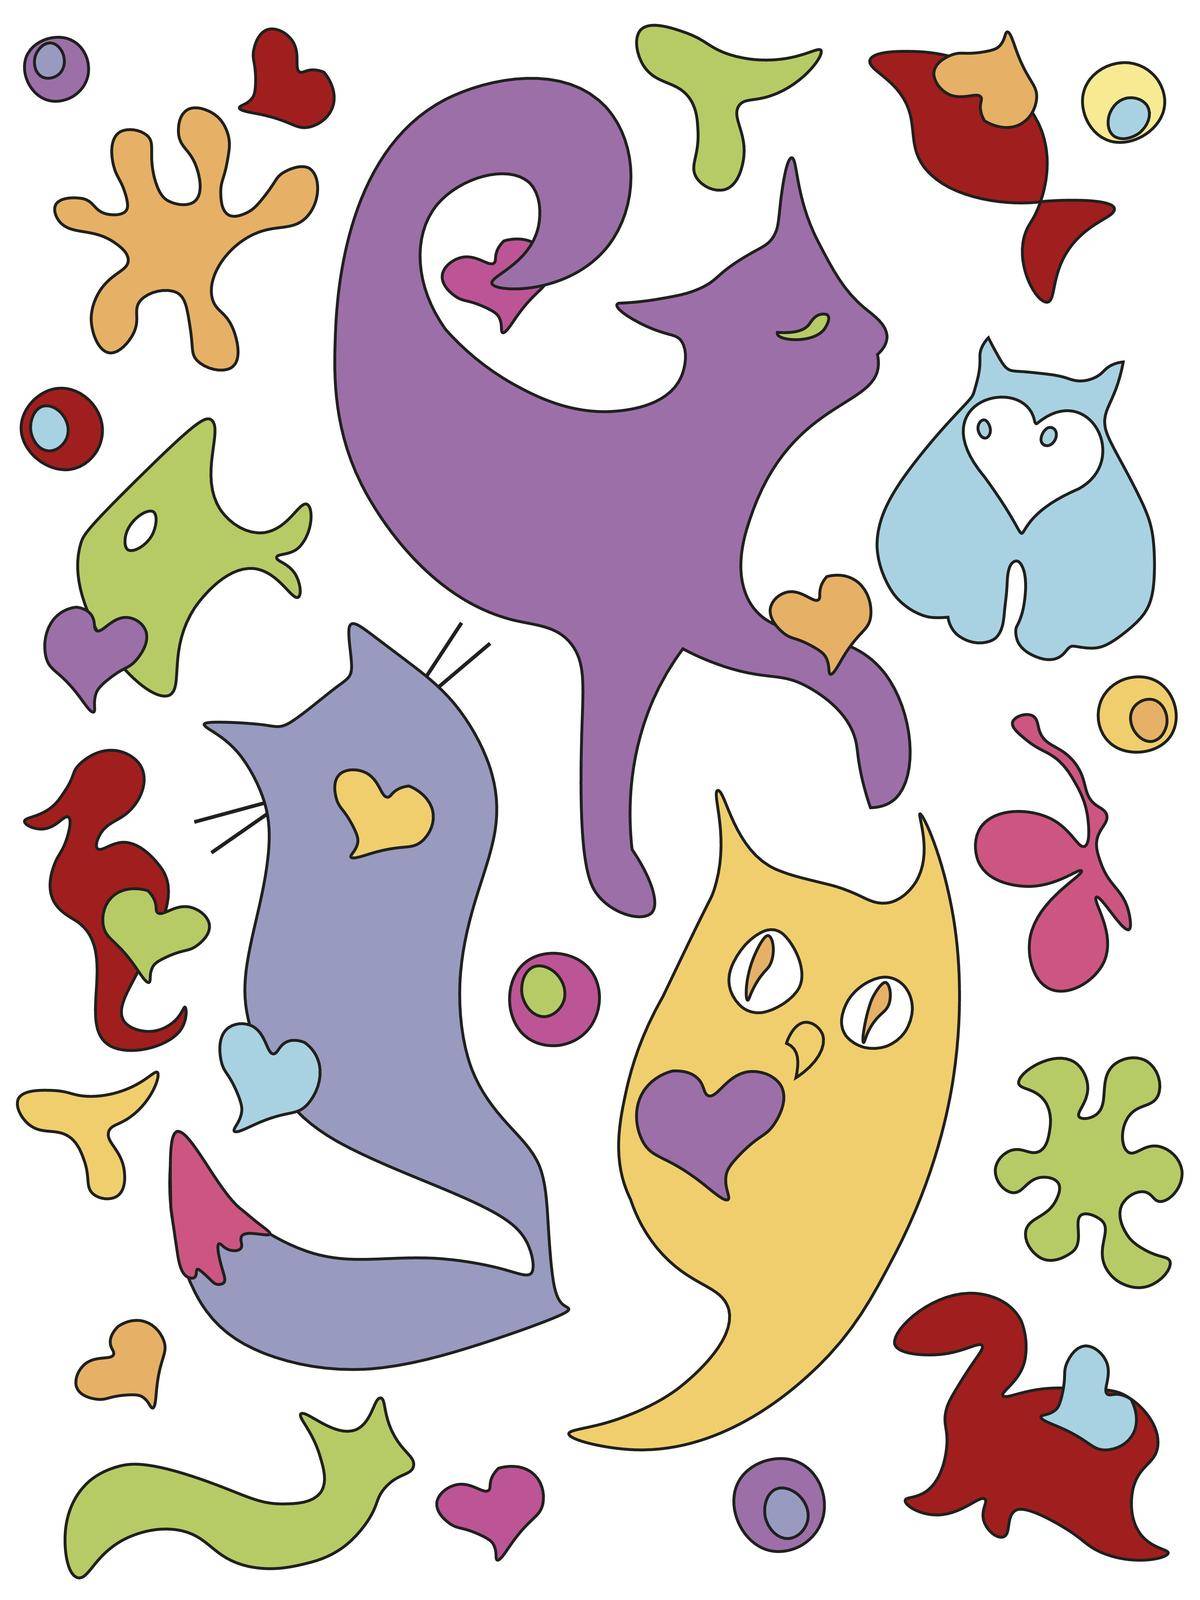 Funny cats and fishes figures hand drown doodle style. Seamless pattern for print, fabric, baby dress, design element. by Liza_RKS_Design